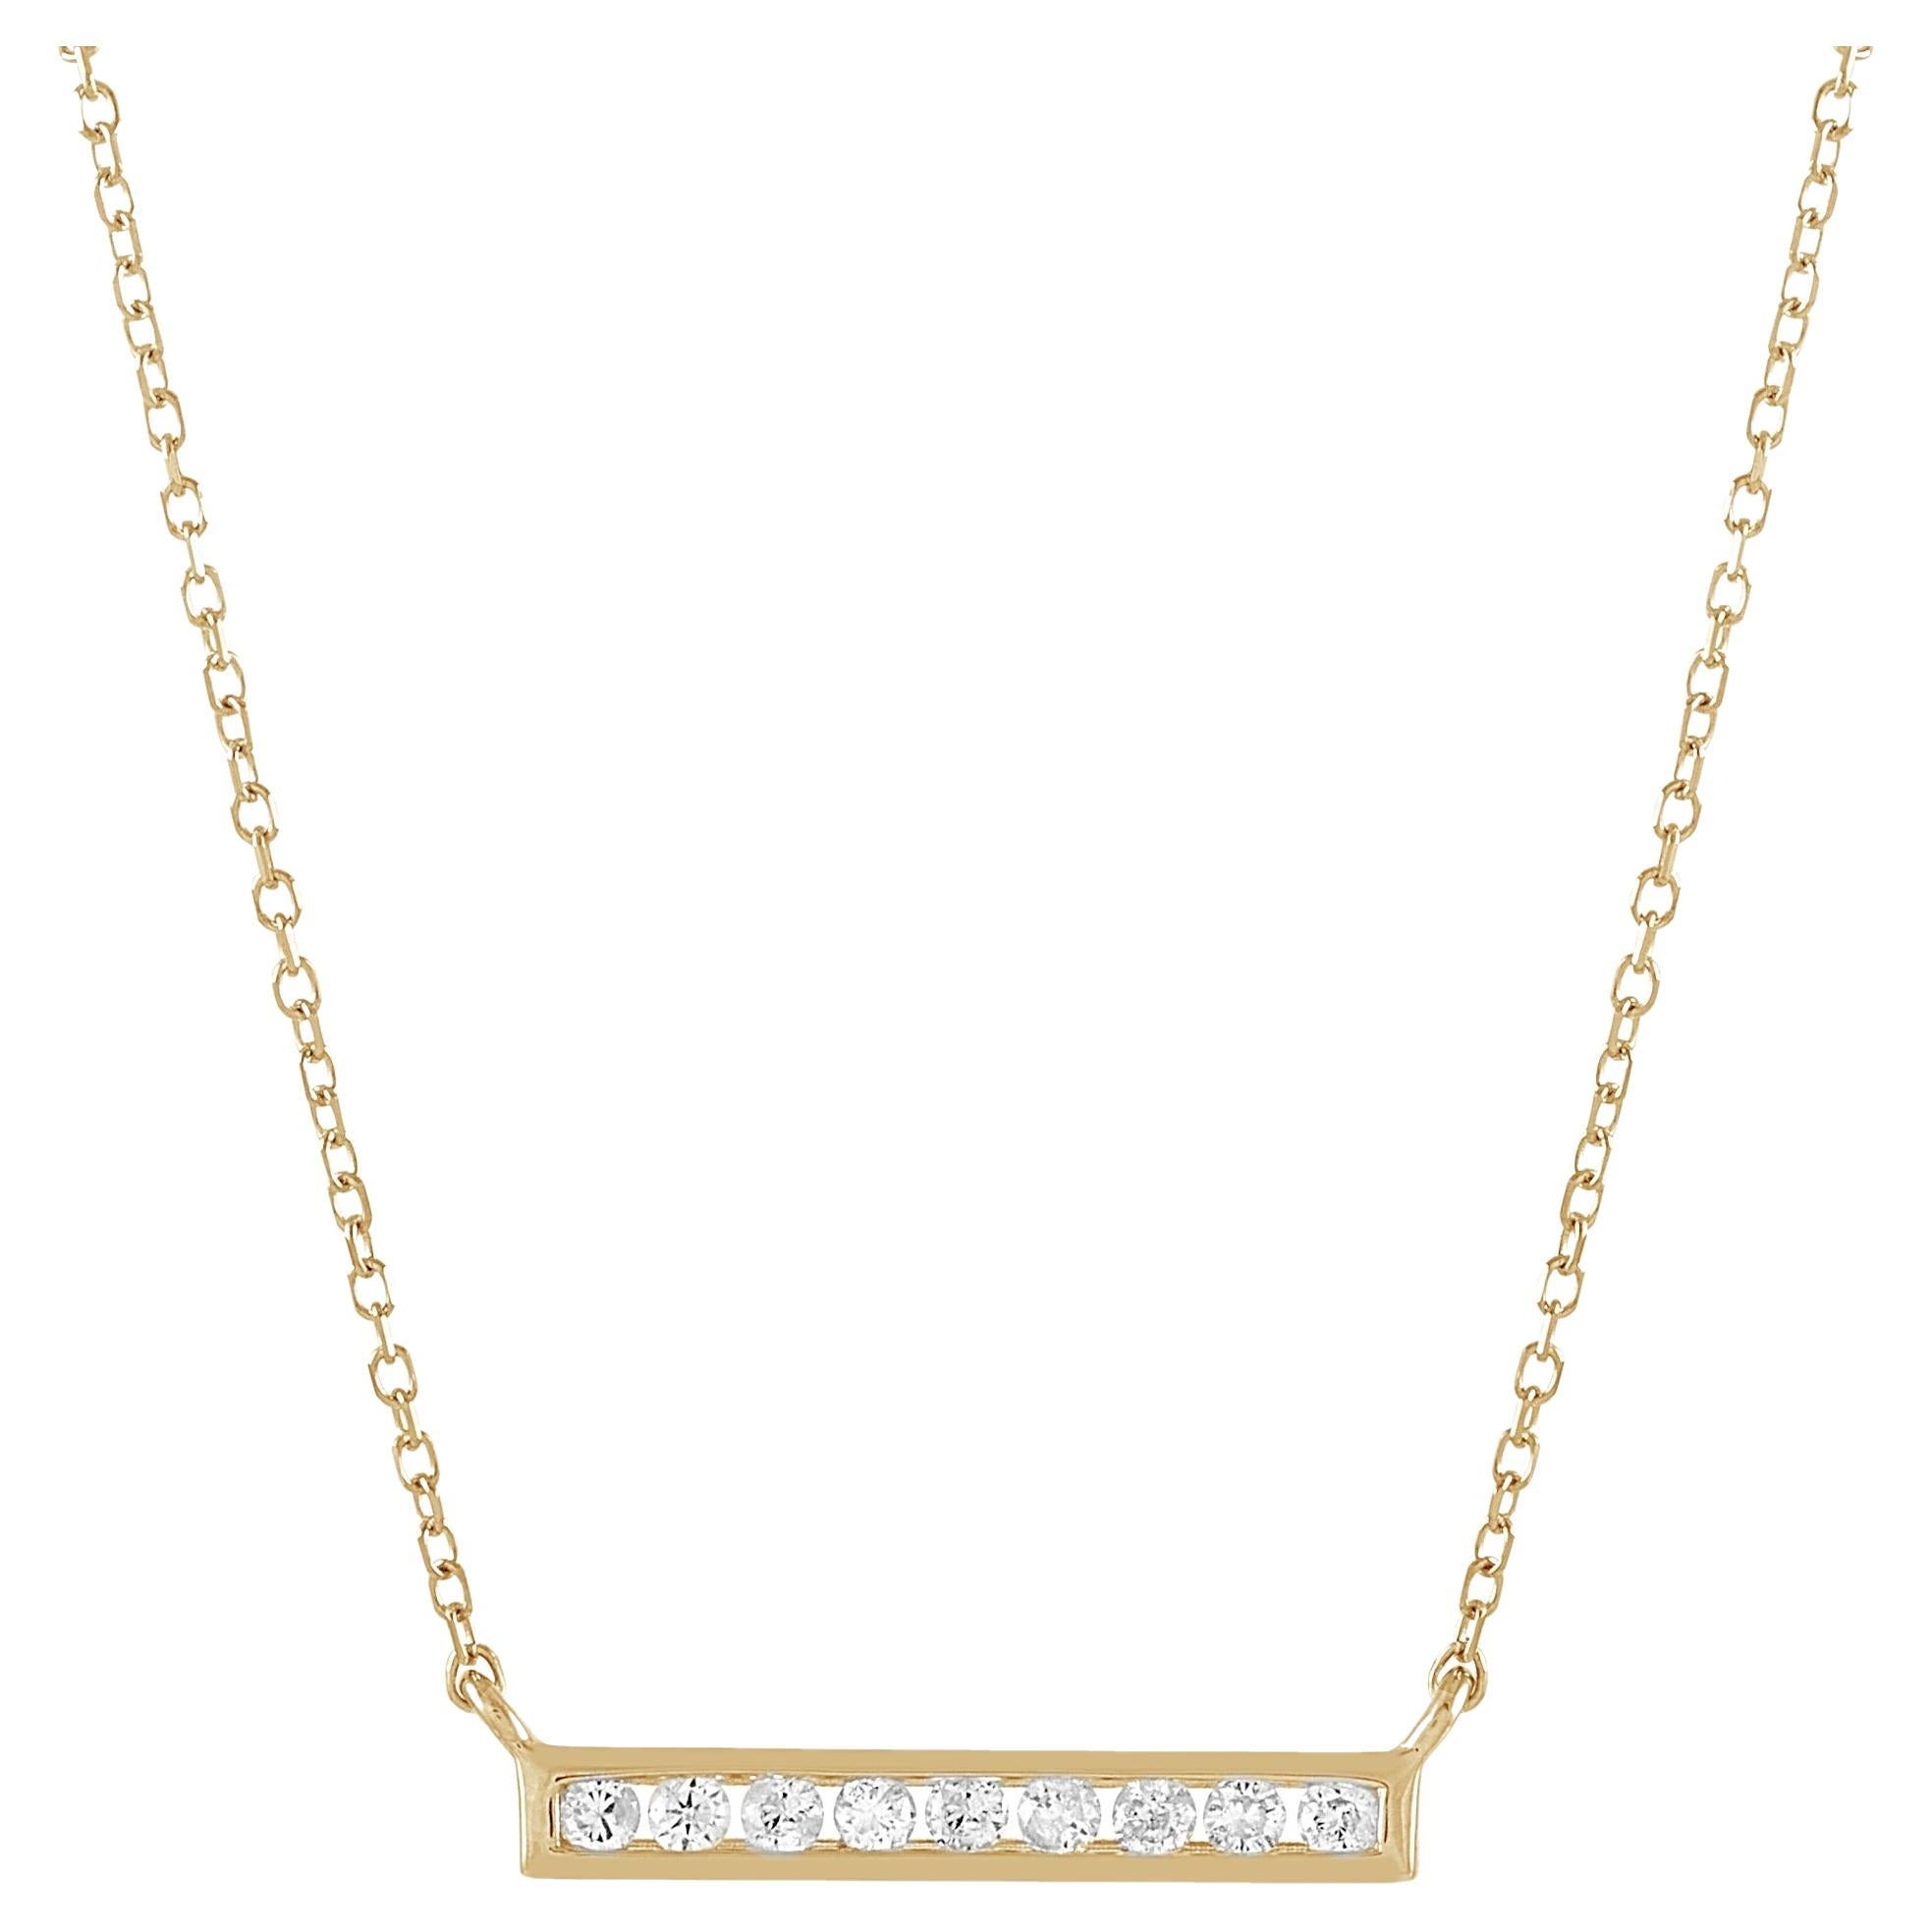 Lb Exclusive 14k Yellow Gold 0.10 Carat Diamond Bar Necklace For Sale